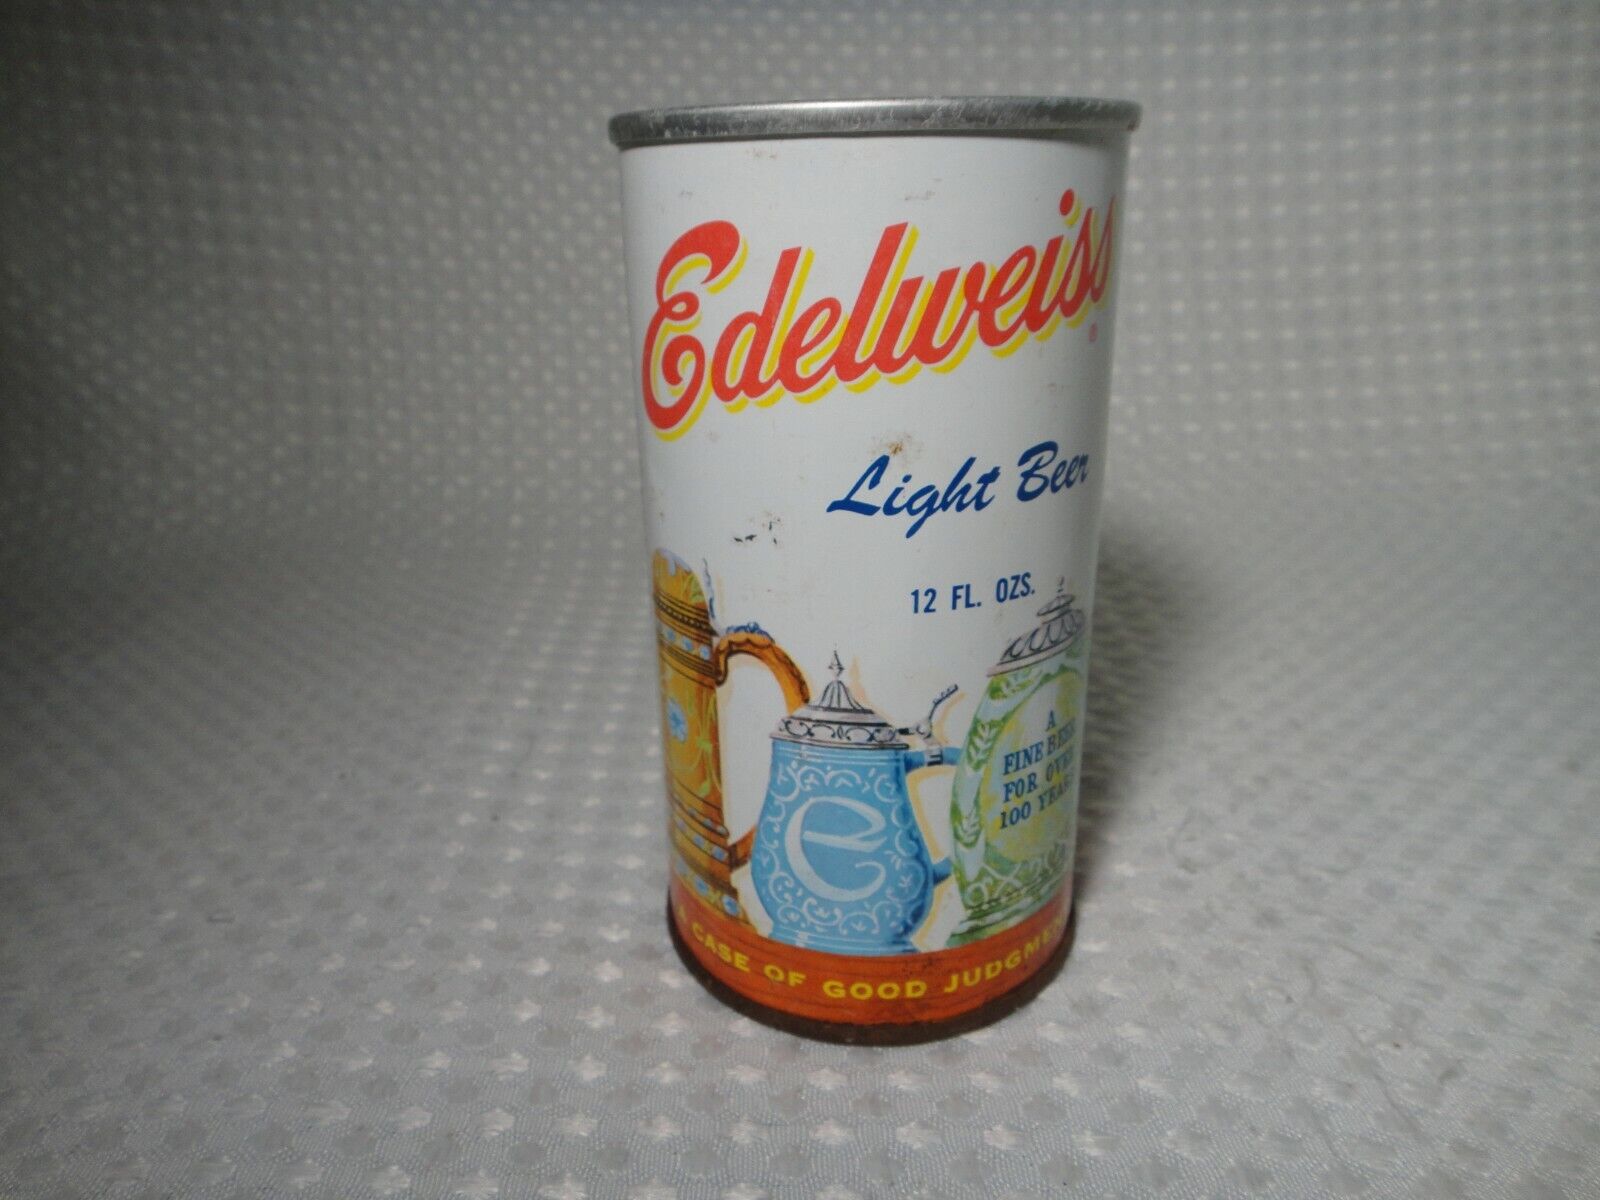 Edelweiss Light Beer Can A Fine Beer For Over 100 Years Empty